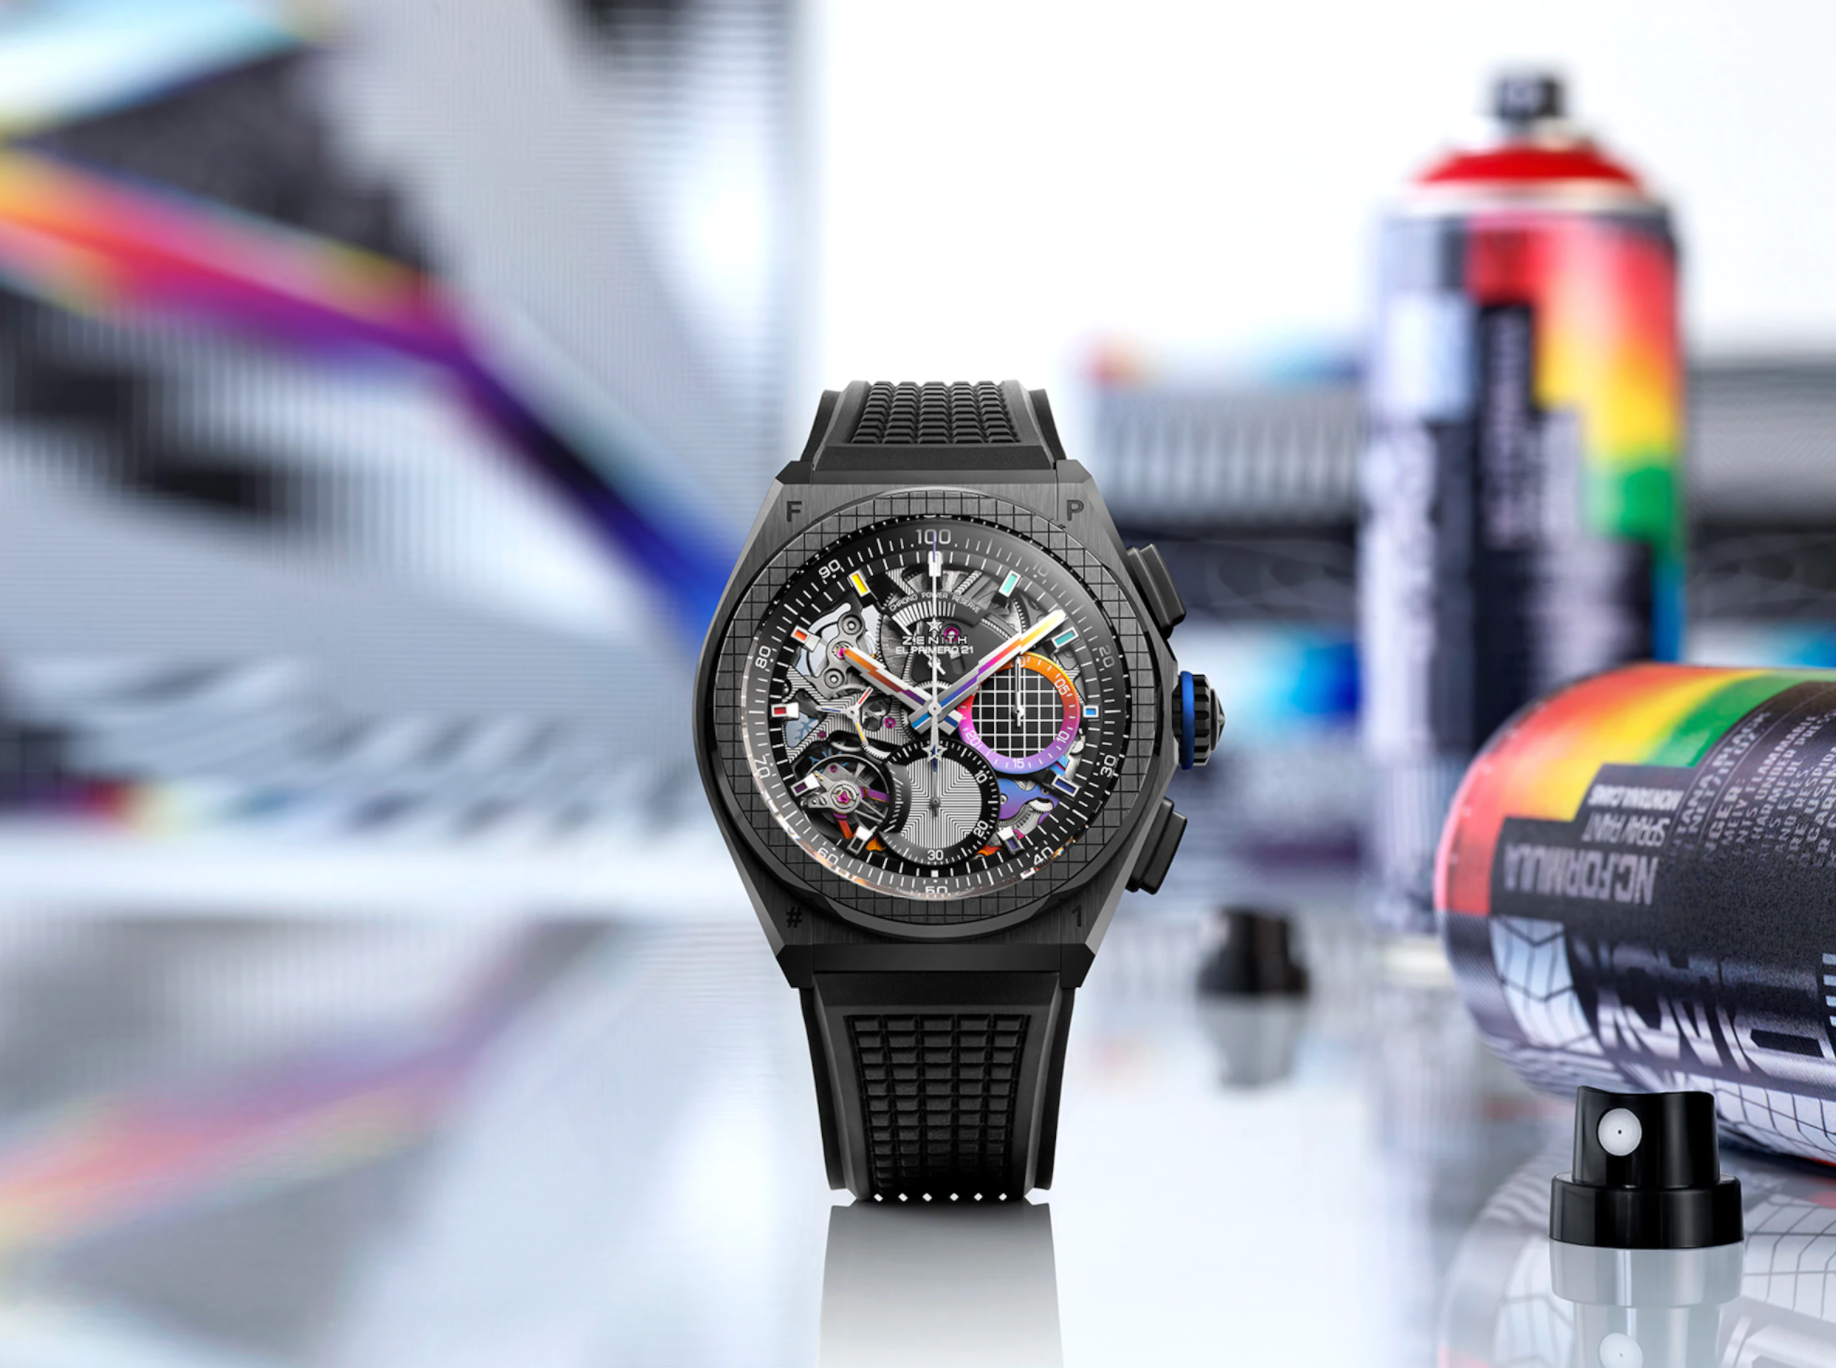 ZENITH AND FELIPE PANTONE COLLABORATE TO CREATE THE MANUFACTURE’S FIRST WATCH DESIGNED WITH A CONTEMPORARY ARTIST